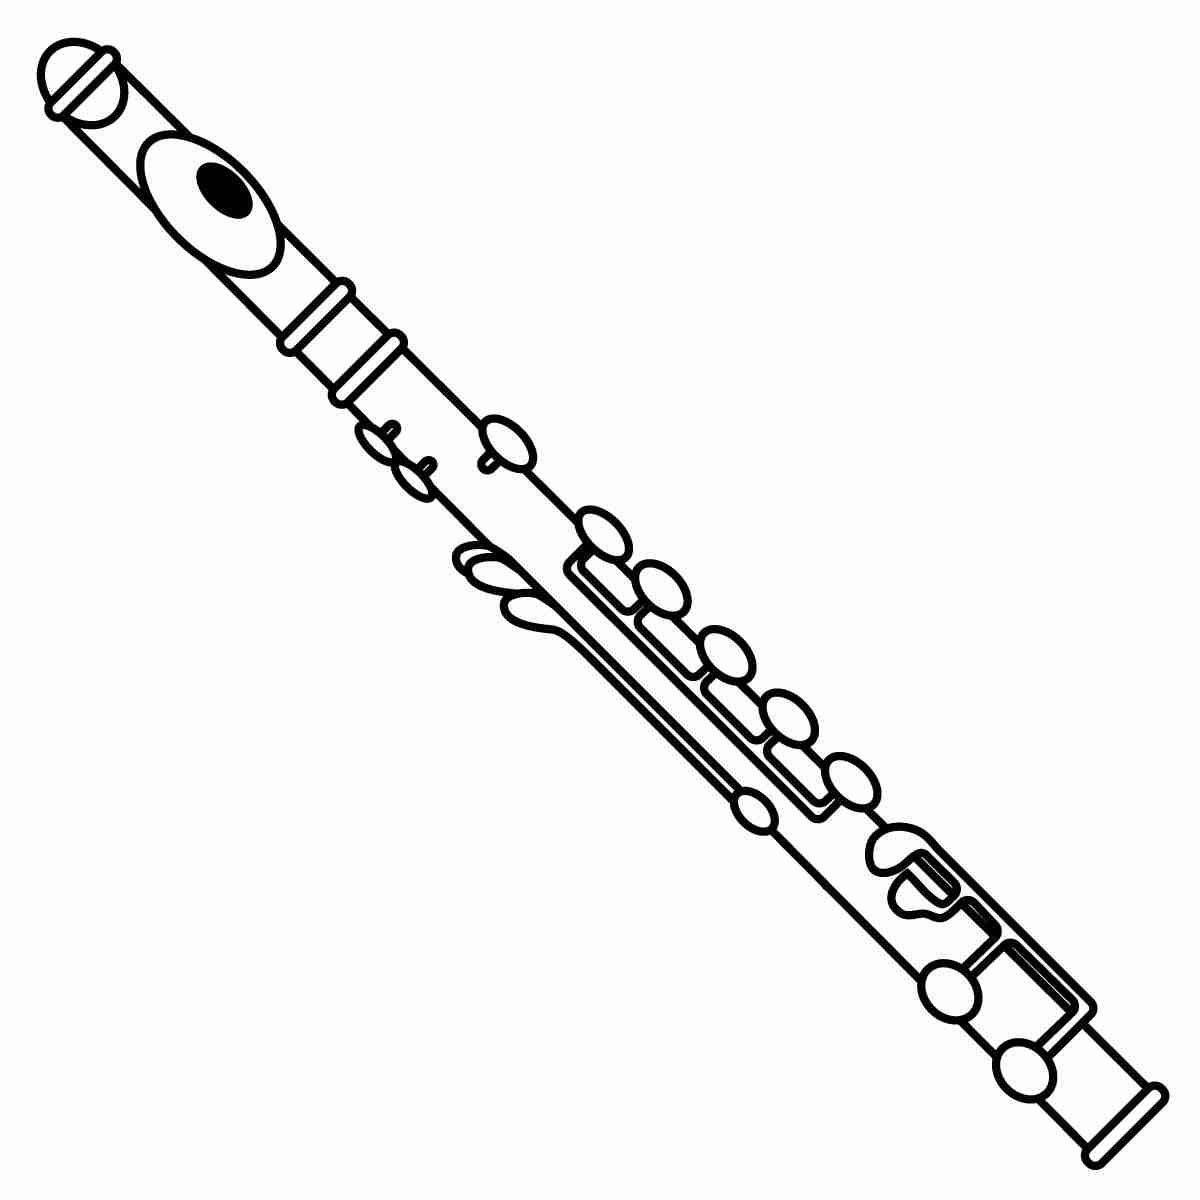 Coloring page musical instrument jazz flute